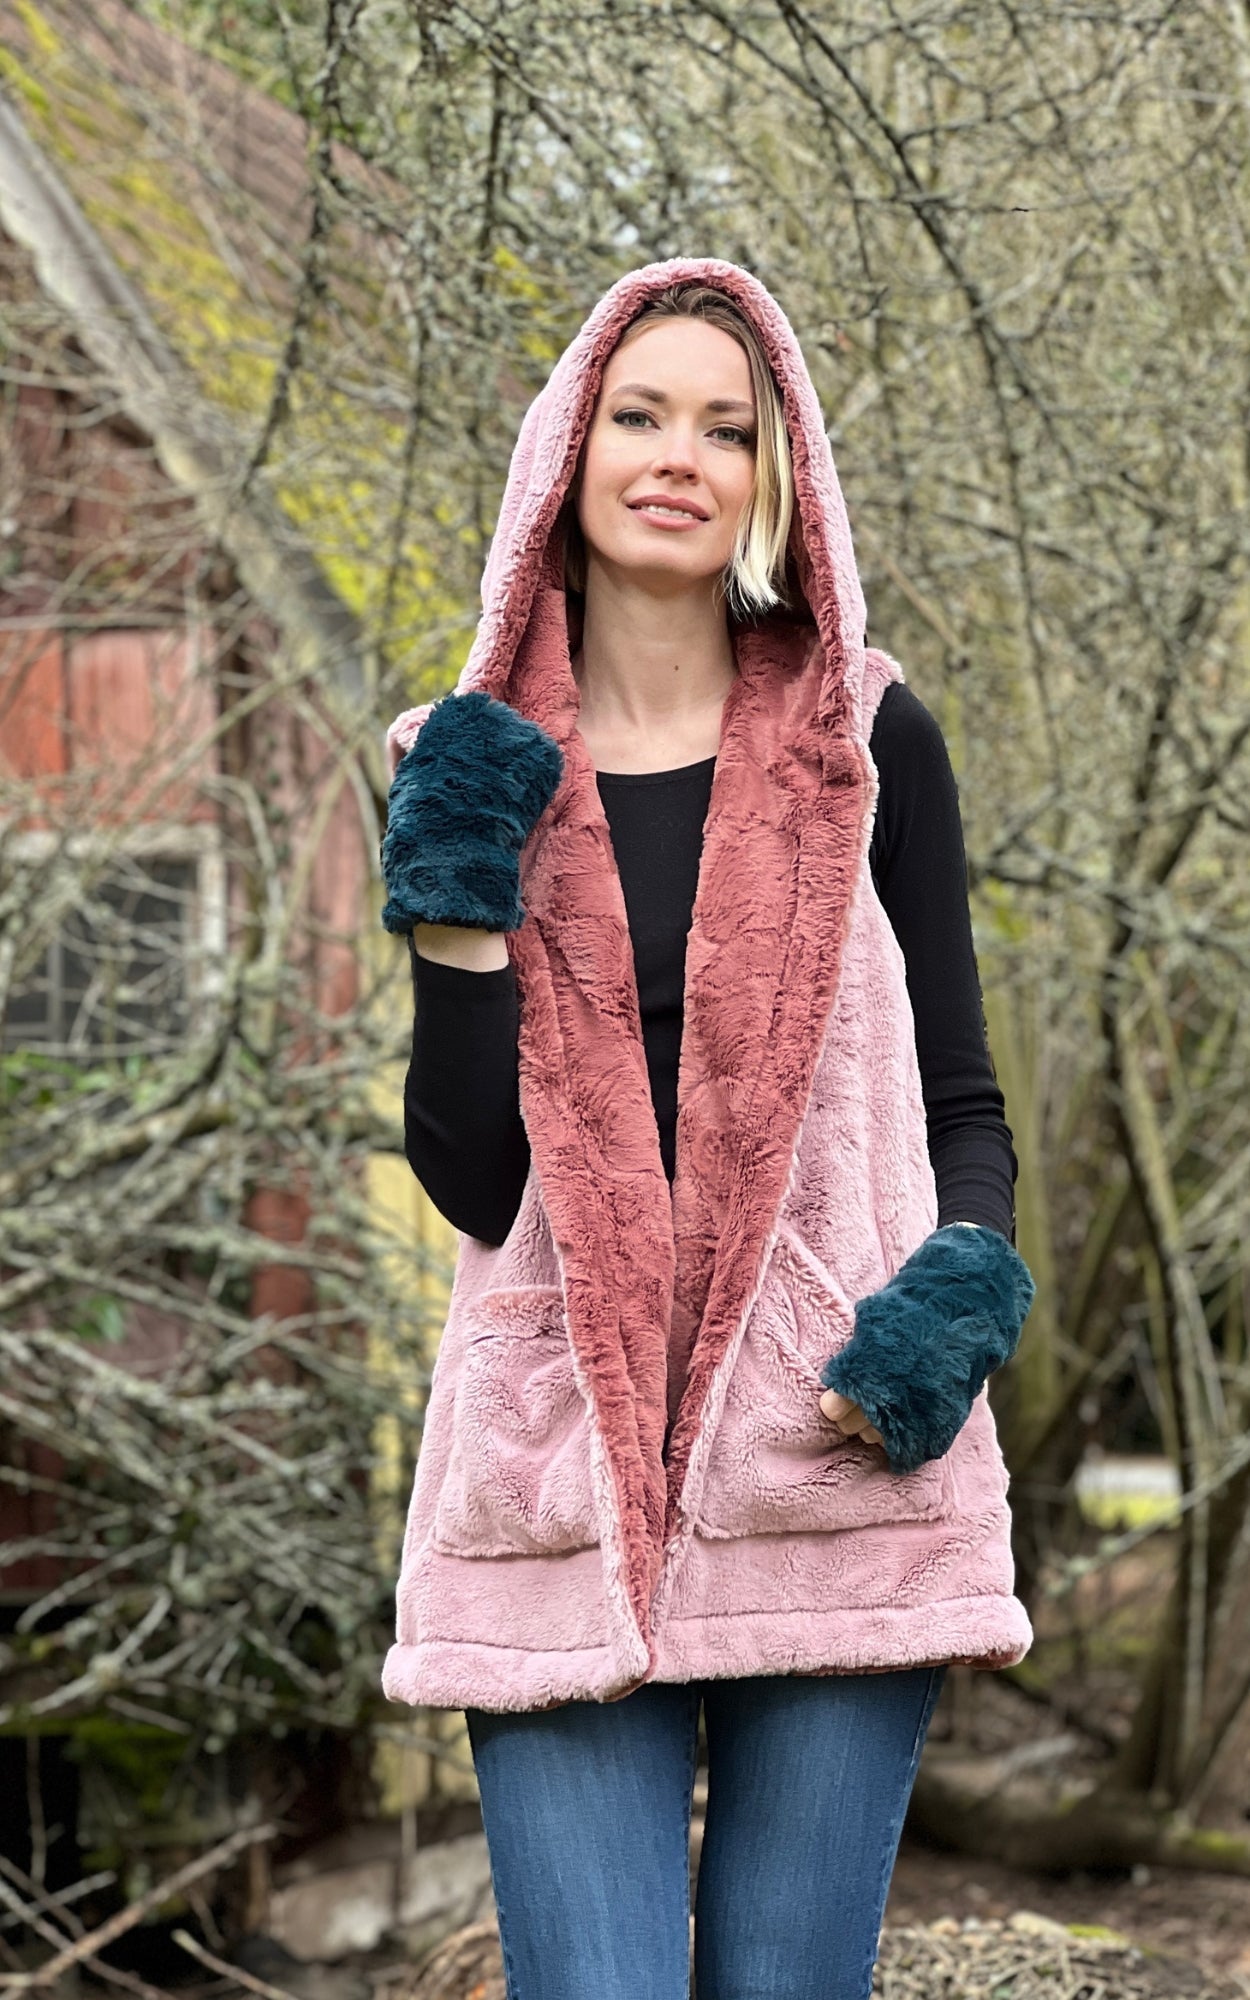 Woman wearing the Oversized Hooded Vest in Frosted Cedar with the reverse color Copper River faux furs. Also wearing faux fur fingerless gloves in Peacock Pond. Handmade in Pandemonium Seattle.